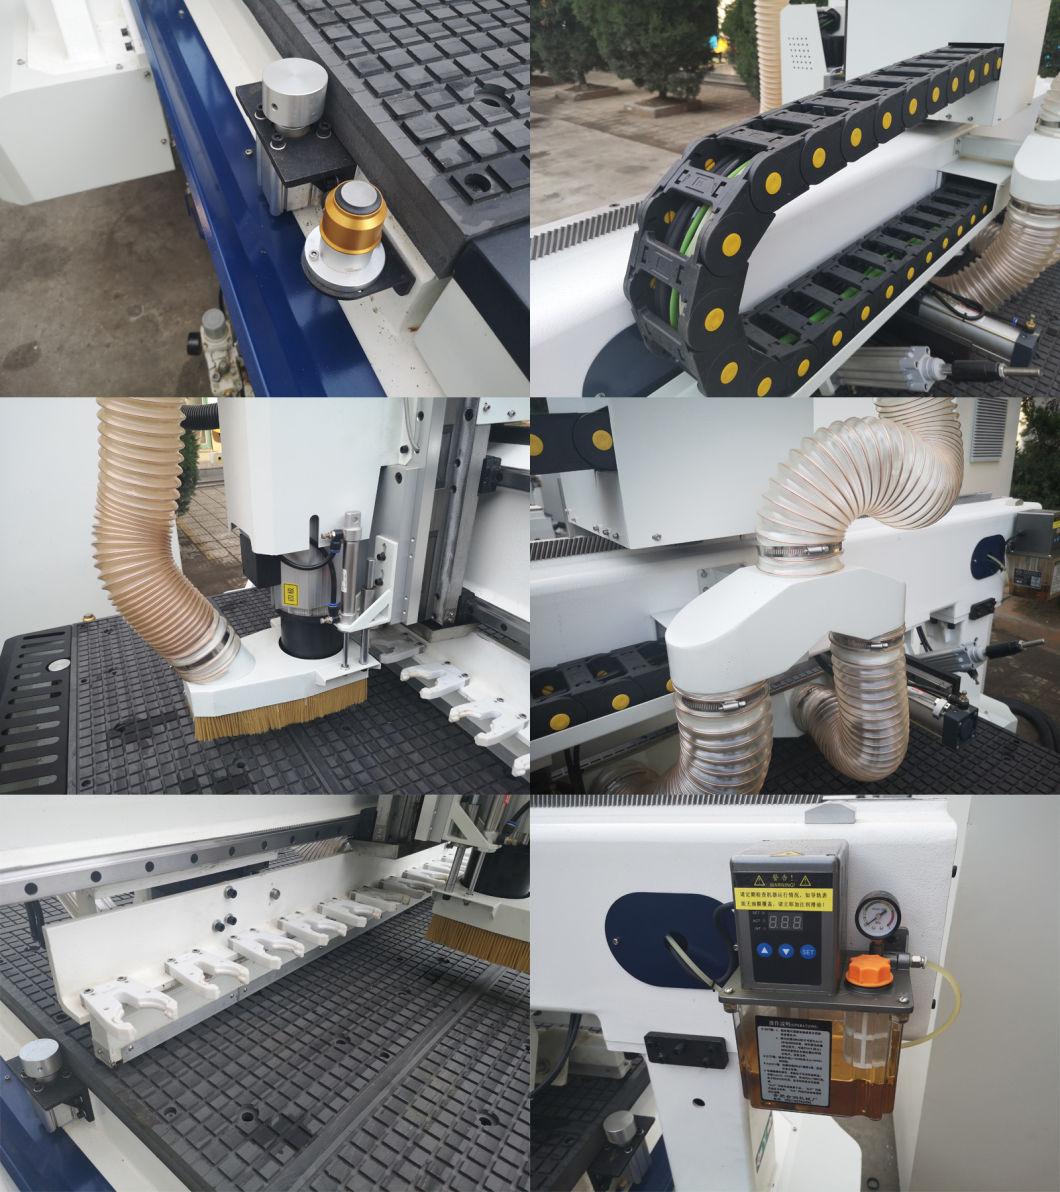 S100-D Linear Tpye Automatic Tool Change CNC Router Machine with Double Spindle